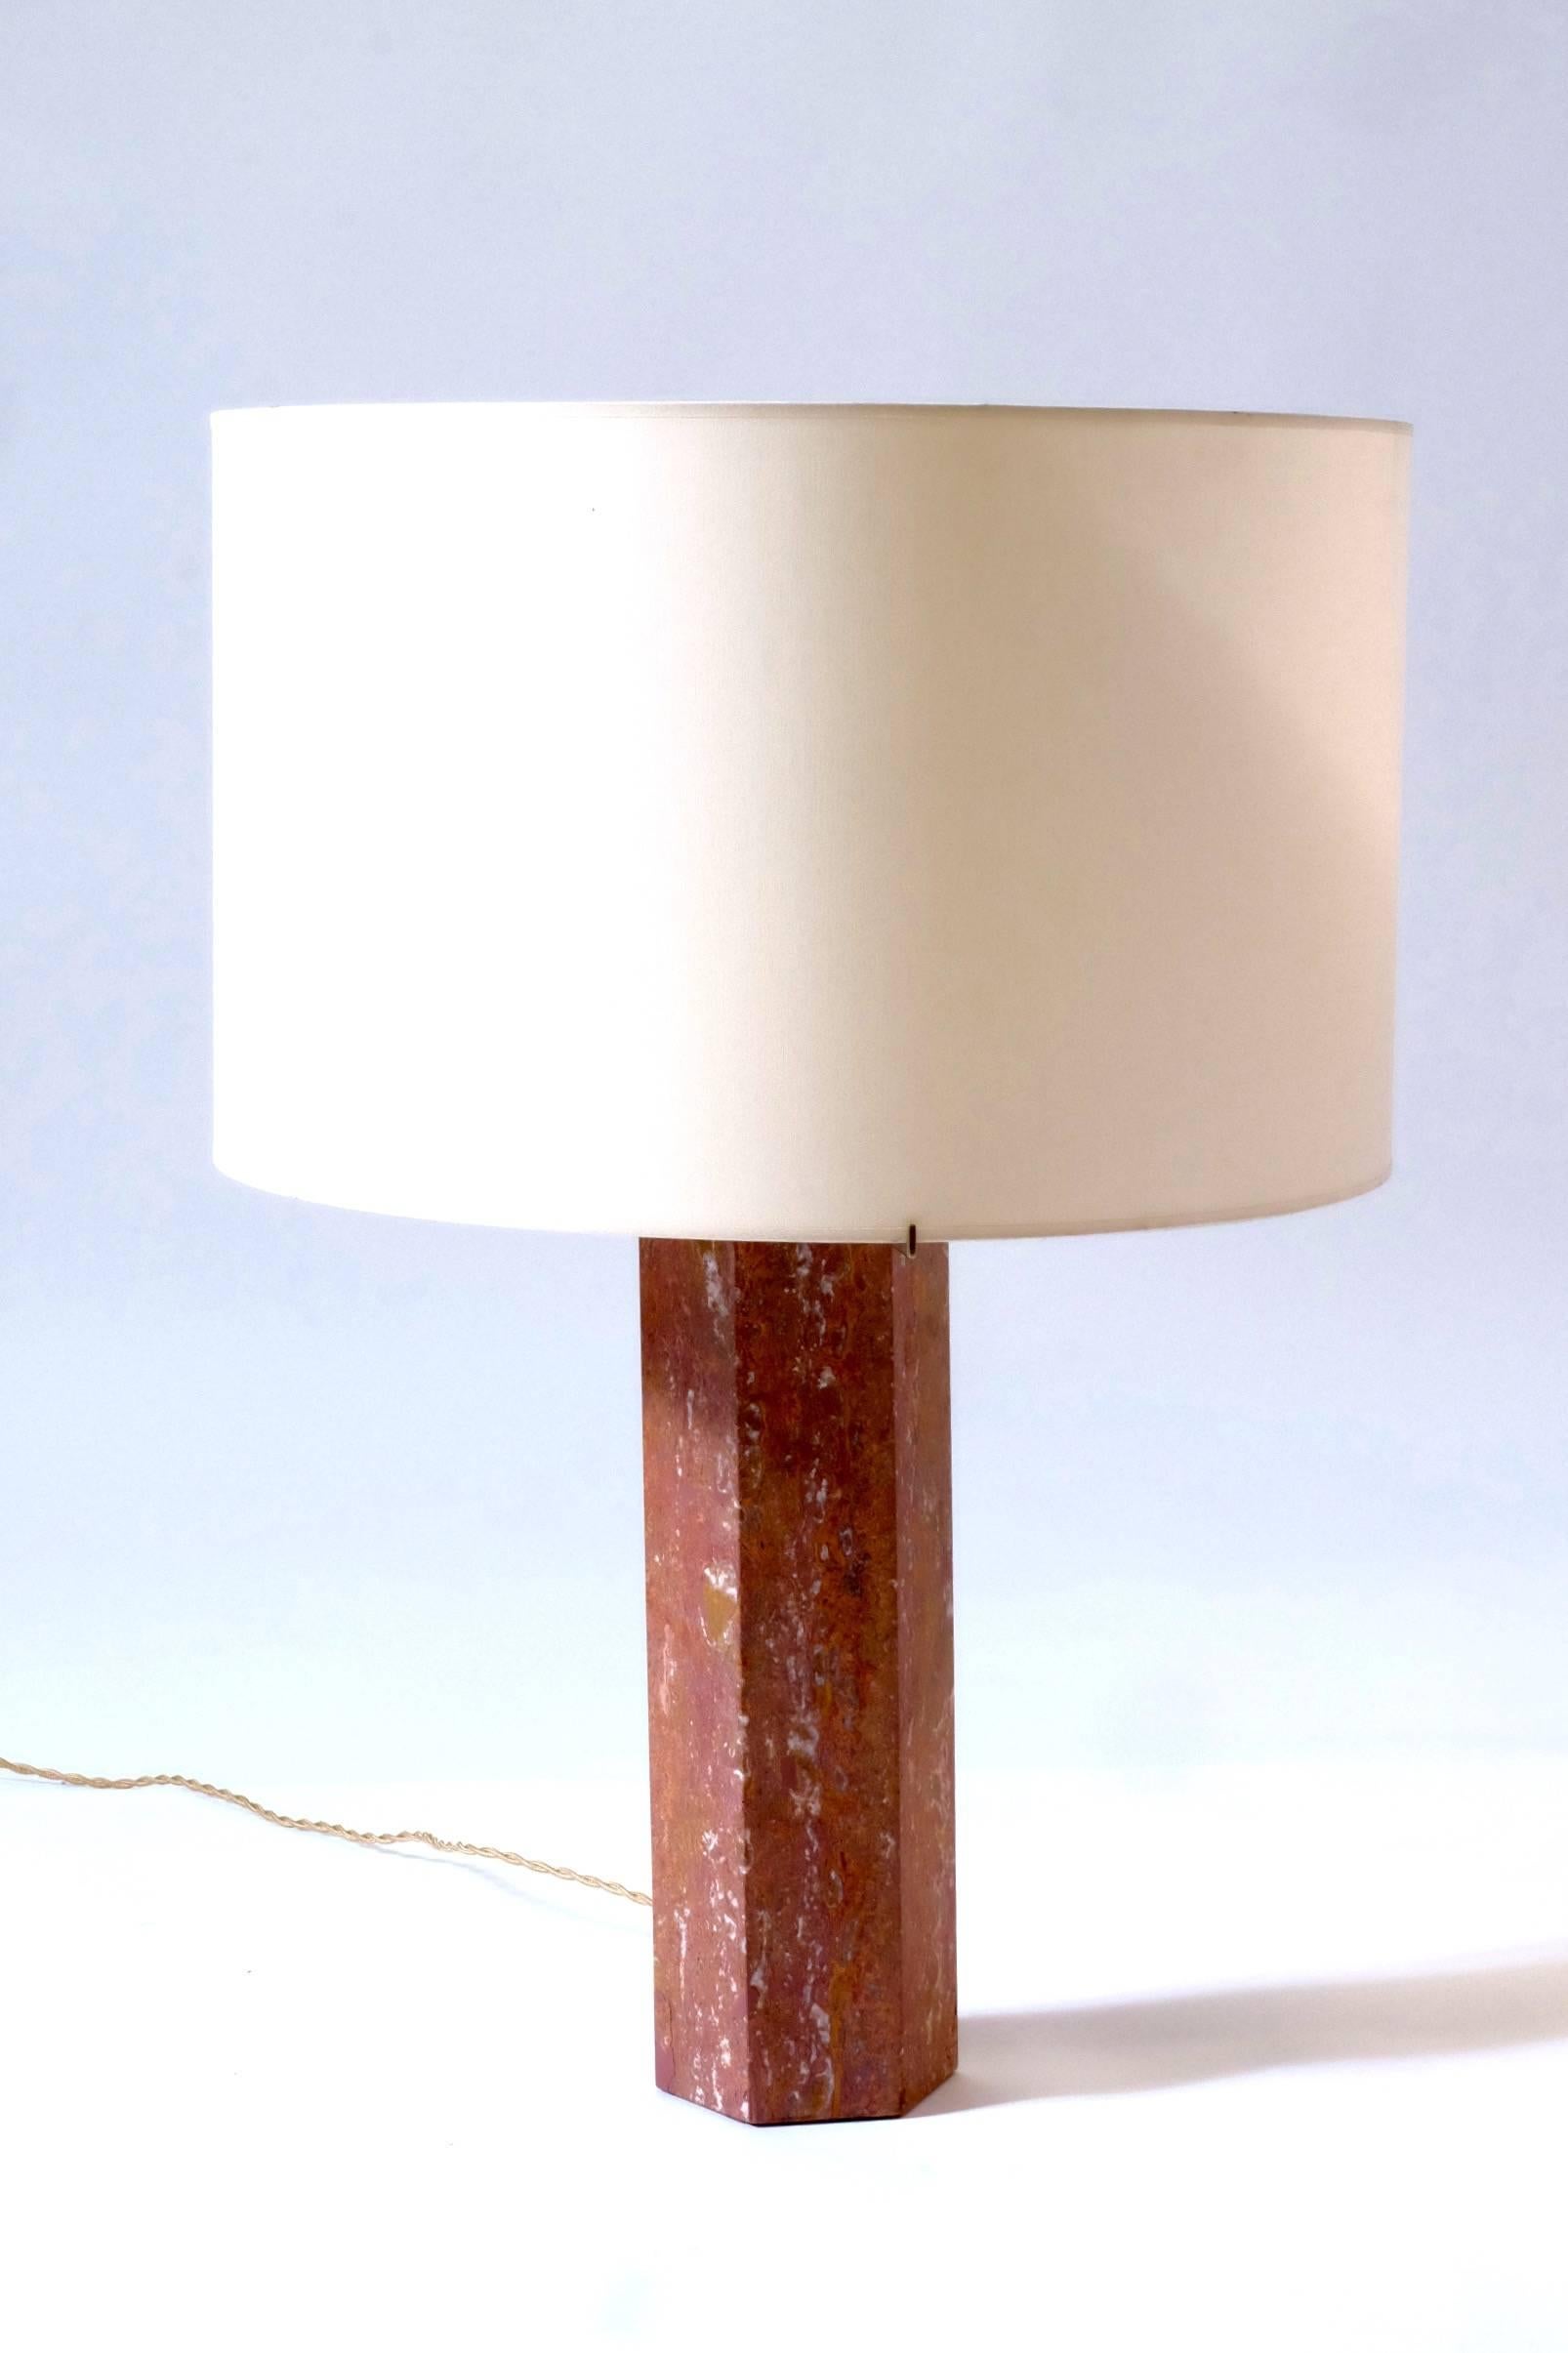 Pair of table lamps in Iran red marble by Jules Wabbes, new rewired, one is repair on the base.
Measures: 45cm x 65cm with shade,
45cm x 44cm without shade.